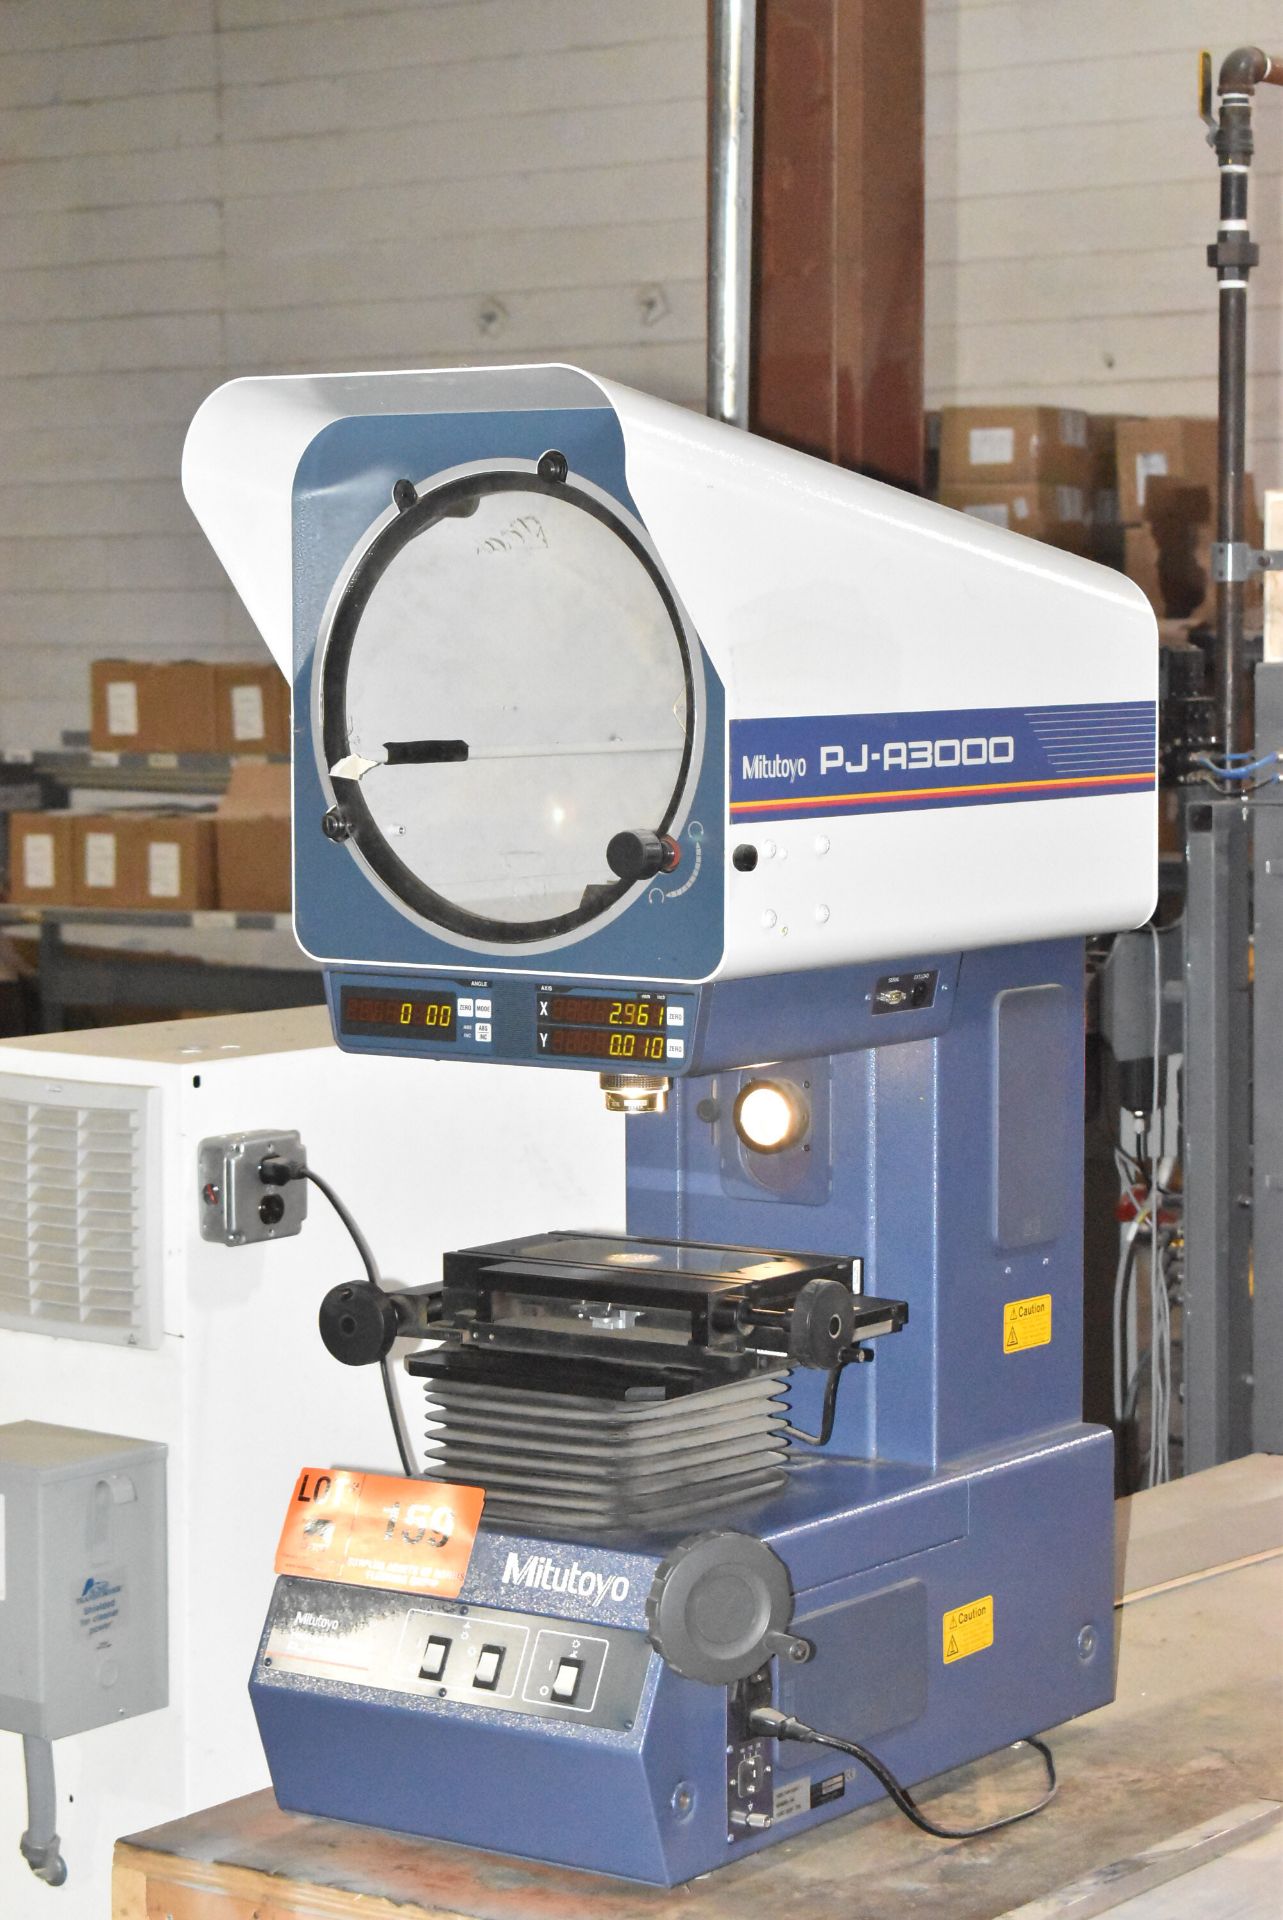 MITUTOYO PJ-A3000 13.5" OPTICAL COMPARATOR WITH BUILT IN 2-AXIS DRO, S/N: 360110